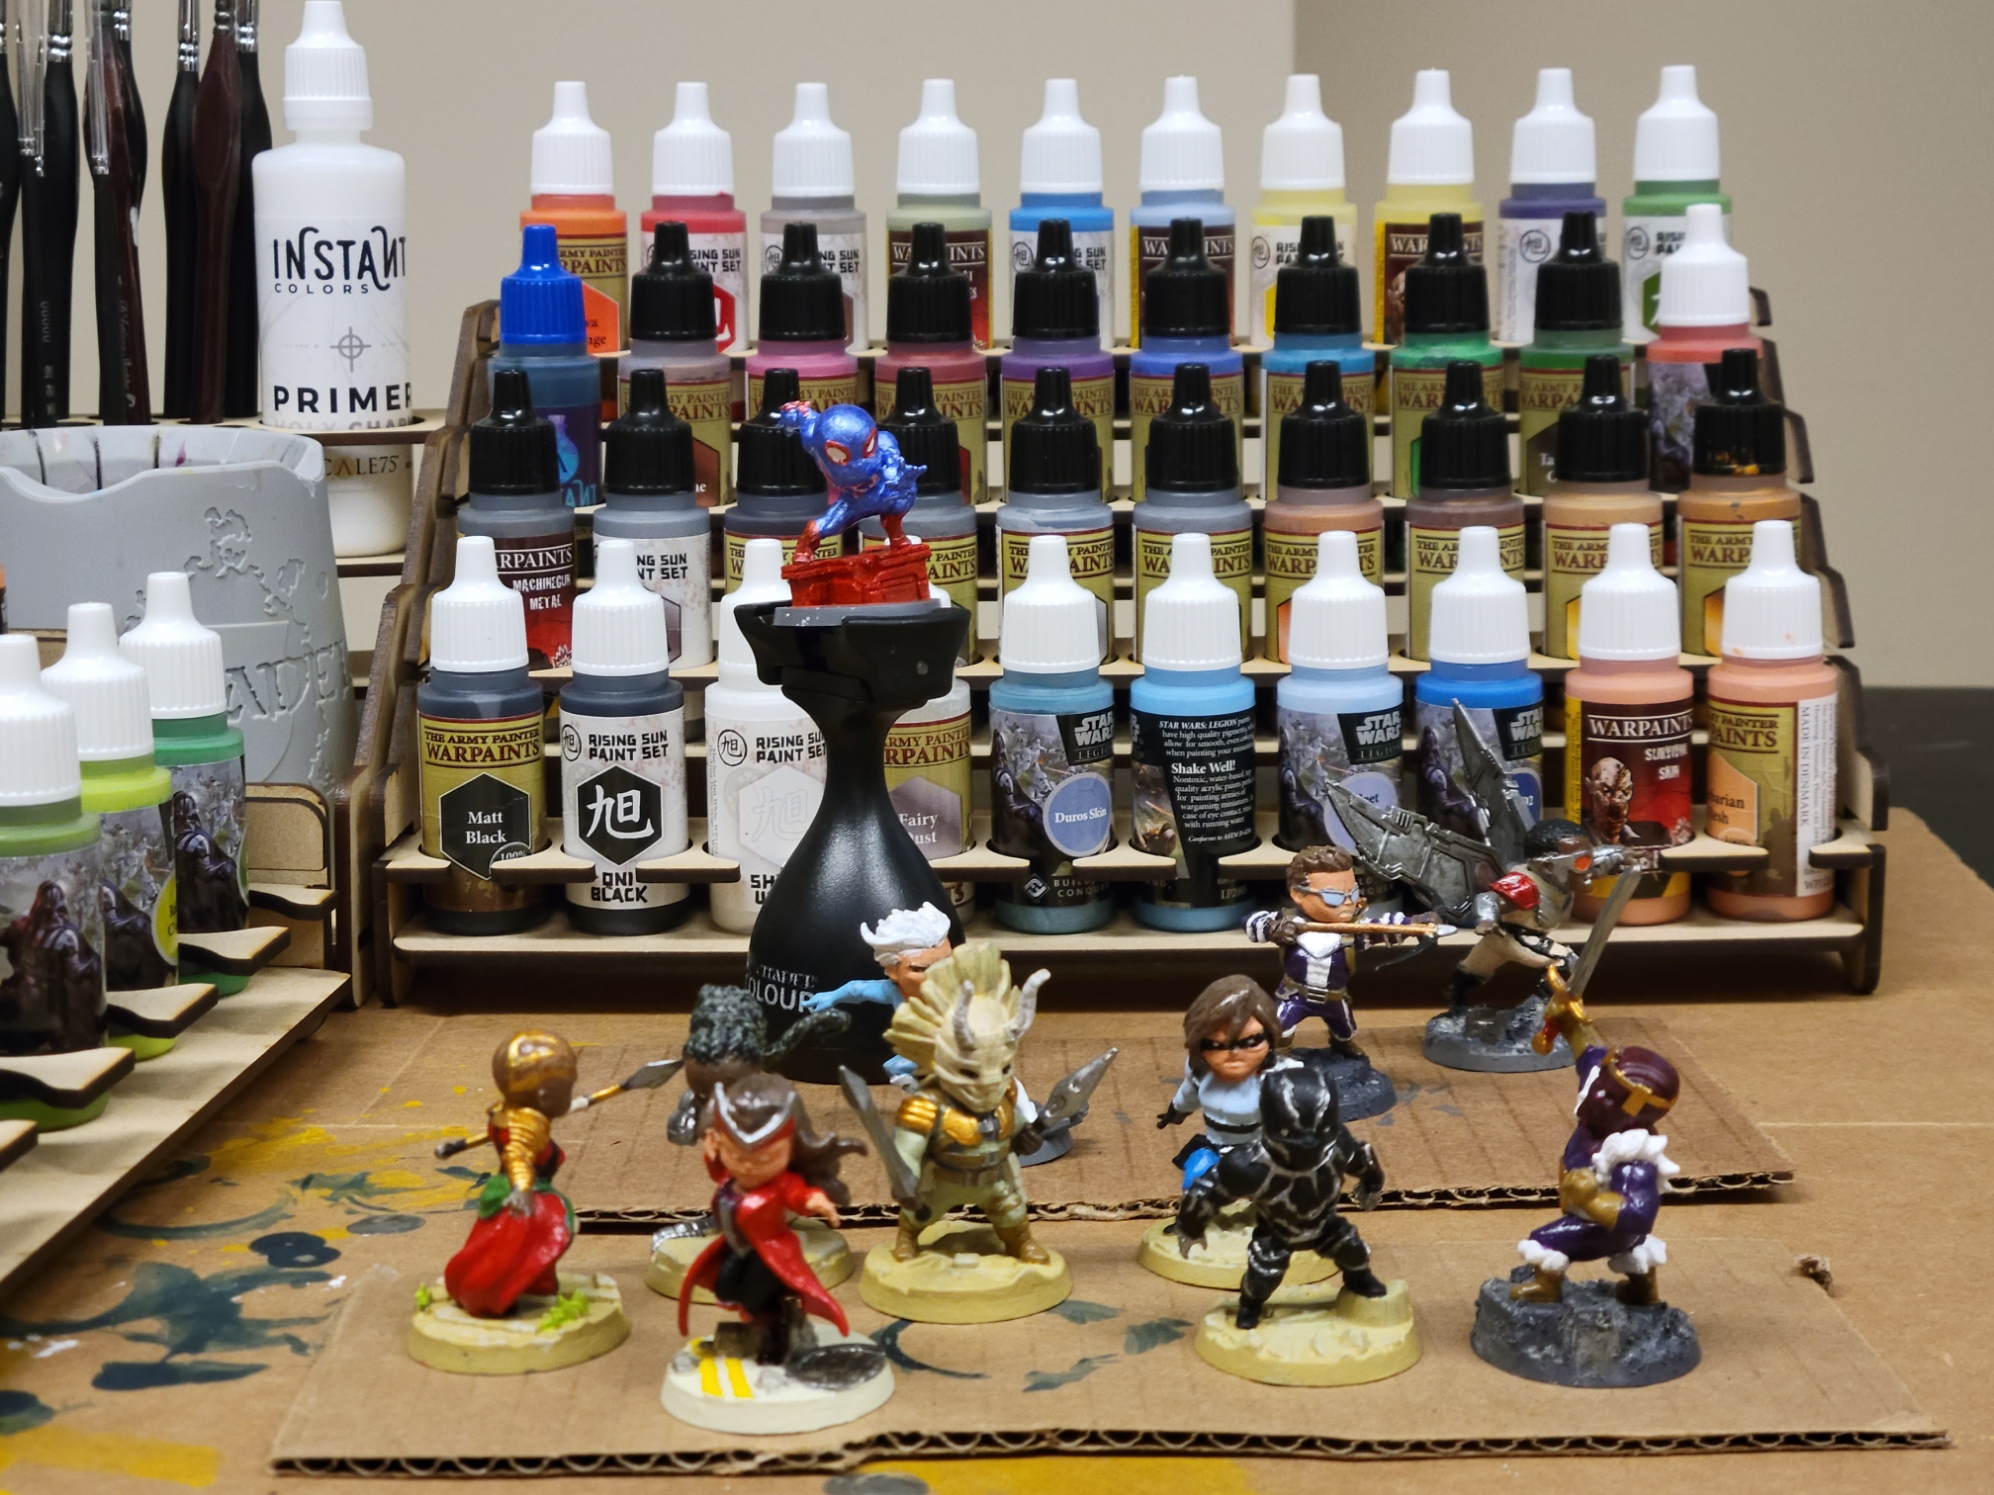 Beginner Miniature Painting Techniques that Work 